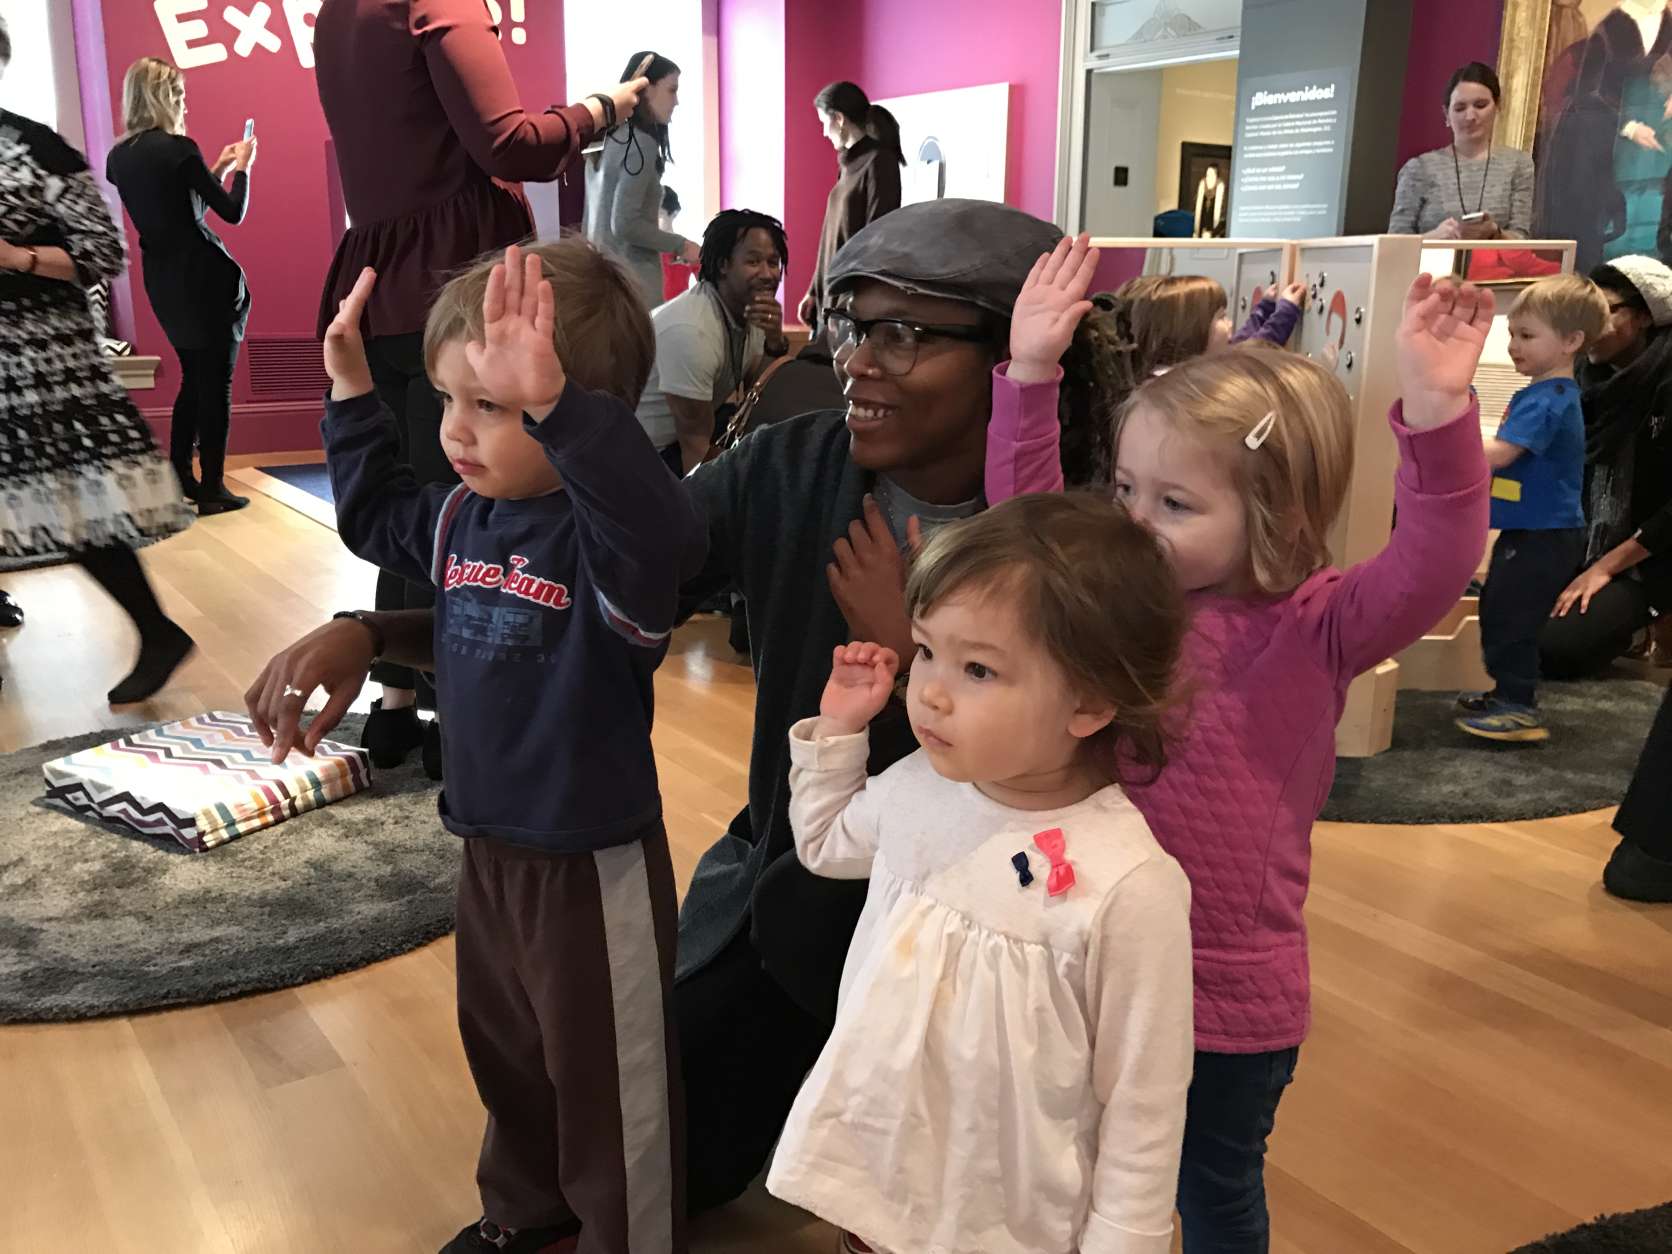 On Saturday, Jan. 28, the museum will open its new interactive children’s exhibit, called “Explore! With the Portrait Gallery.” Inside the first-floor space, little ones can experiment with silhouettes, pose for a digitally projected portrait, or play Picasso using blocks, magnets and felt cut-outs to construct faces. (WTOP/Rachel Nania) 